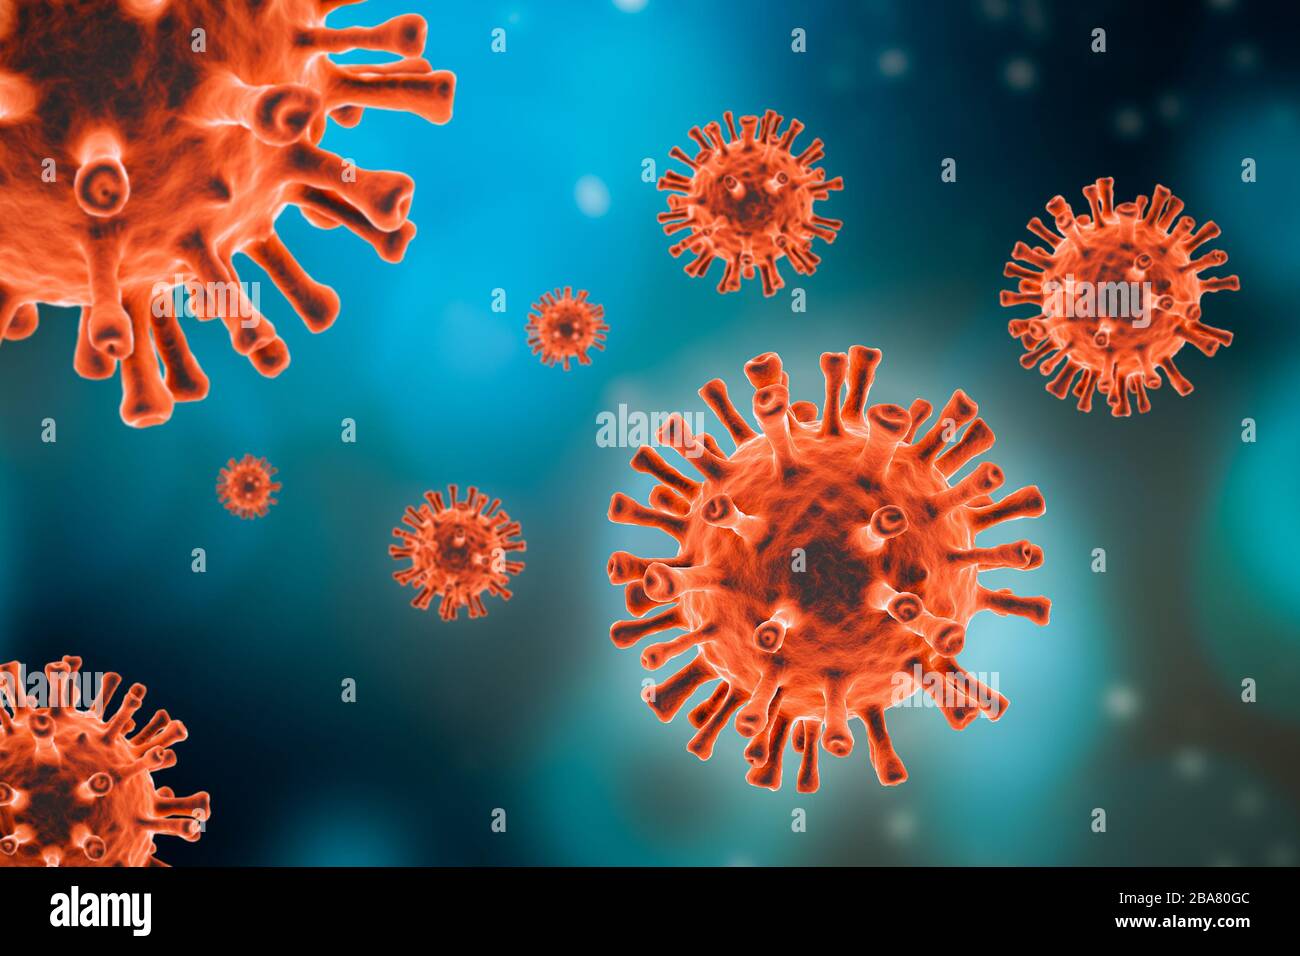 Generic red virus cell on blue background. Microbiology, virology, epidemiology, medicine science 3d rendering illustration concepts. Stock Photo